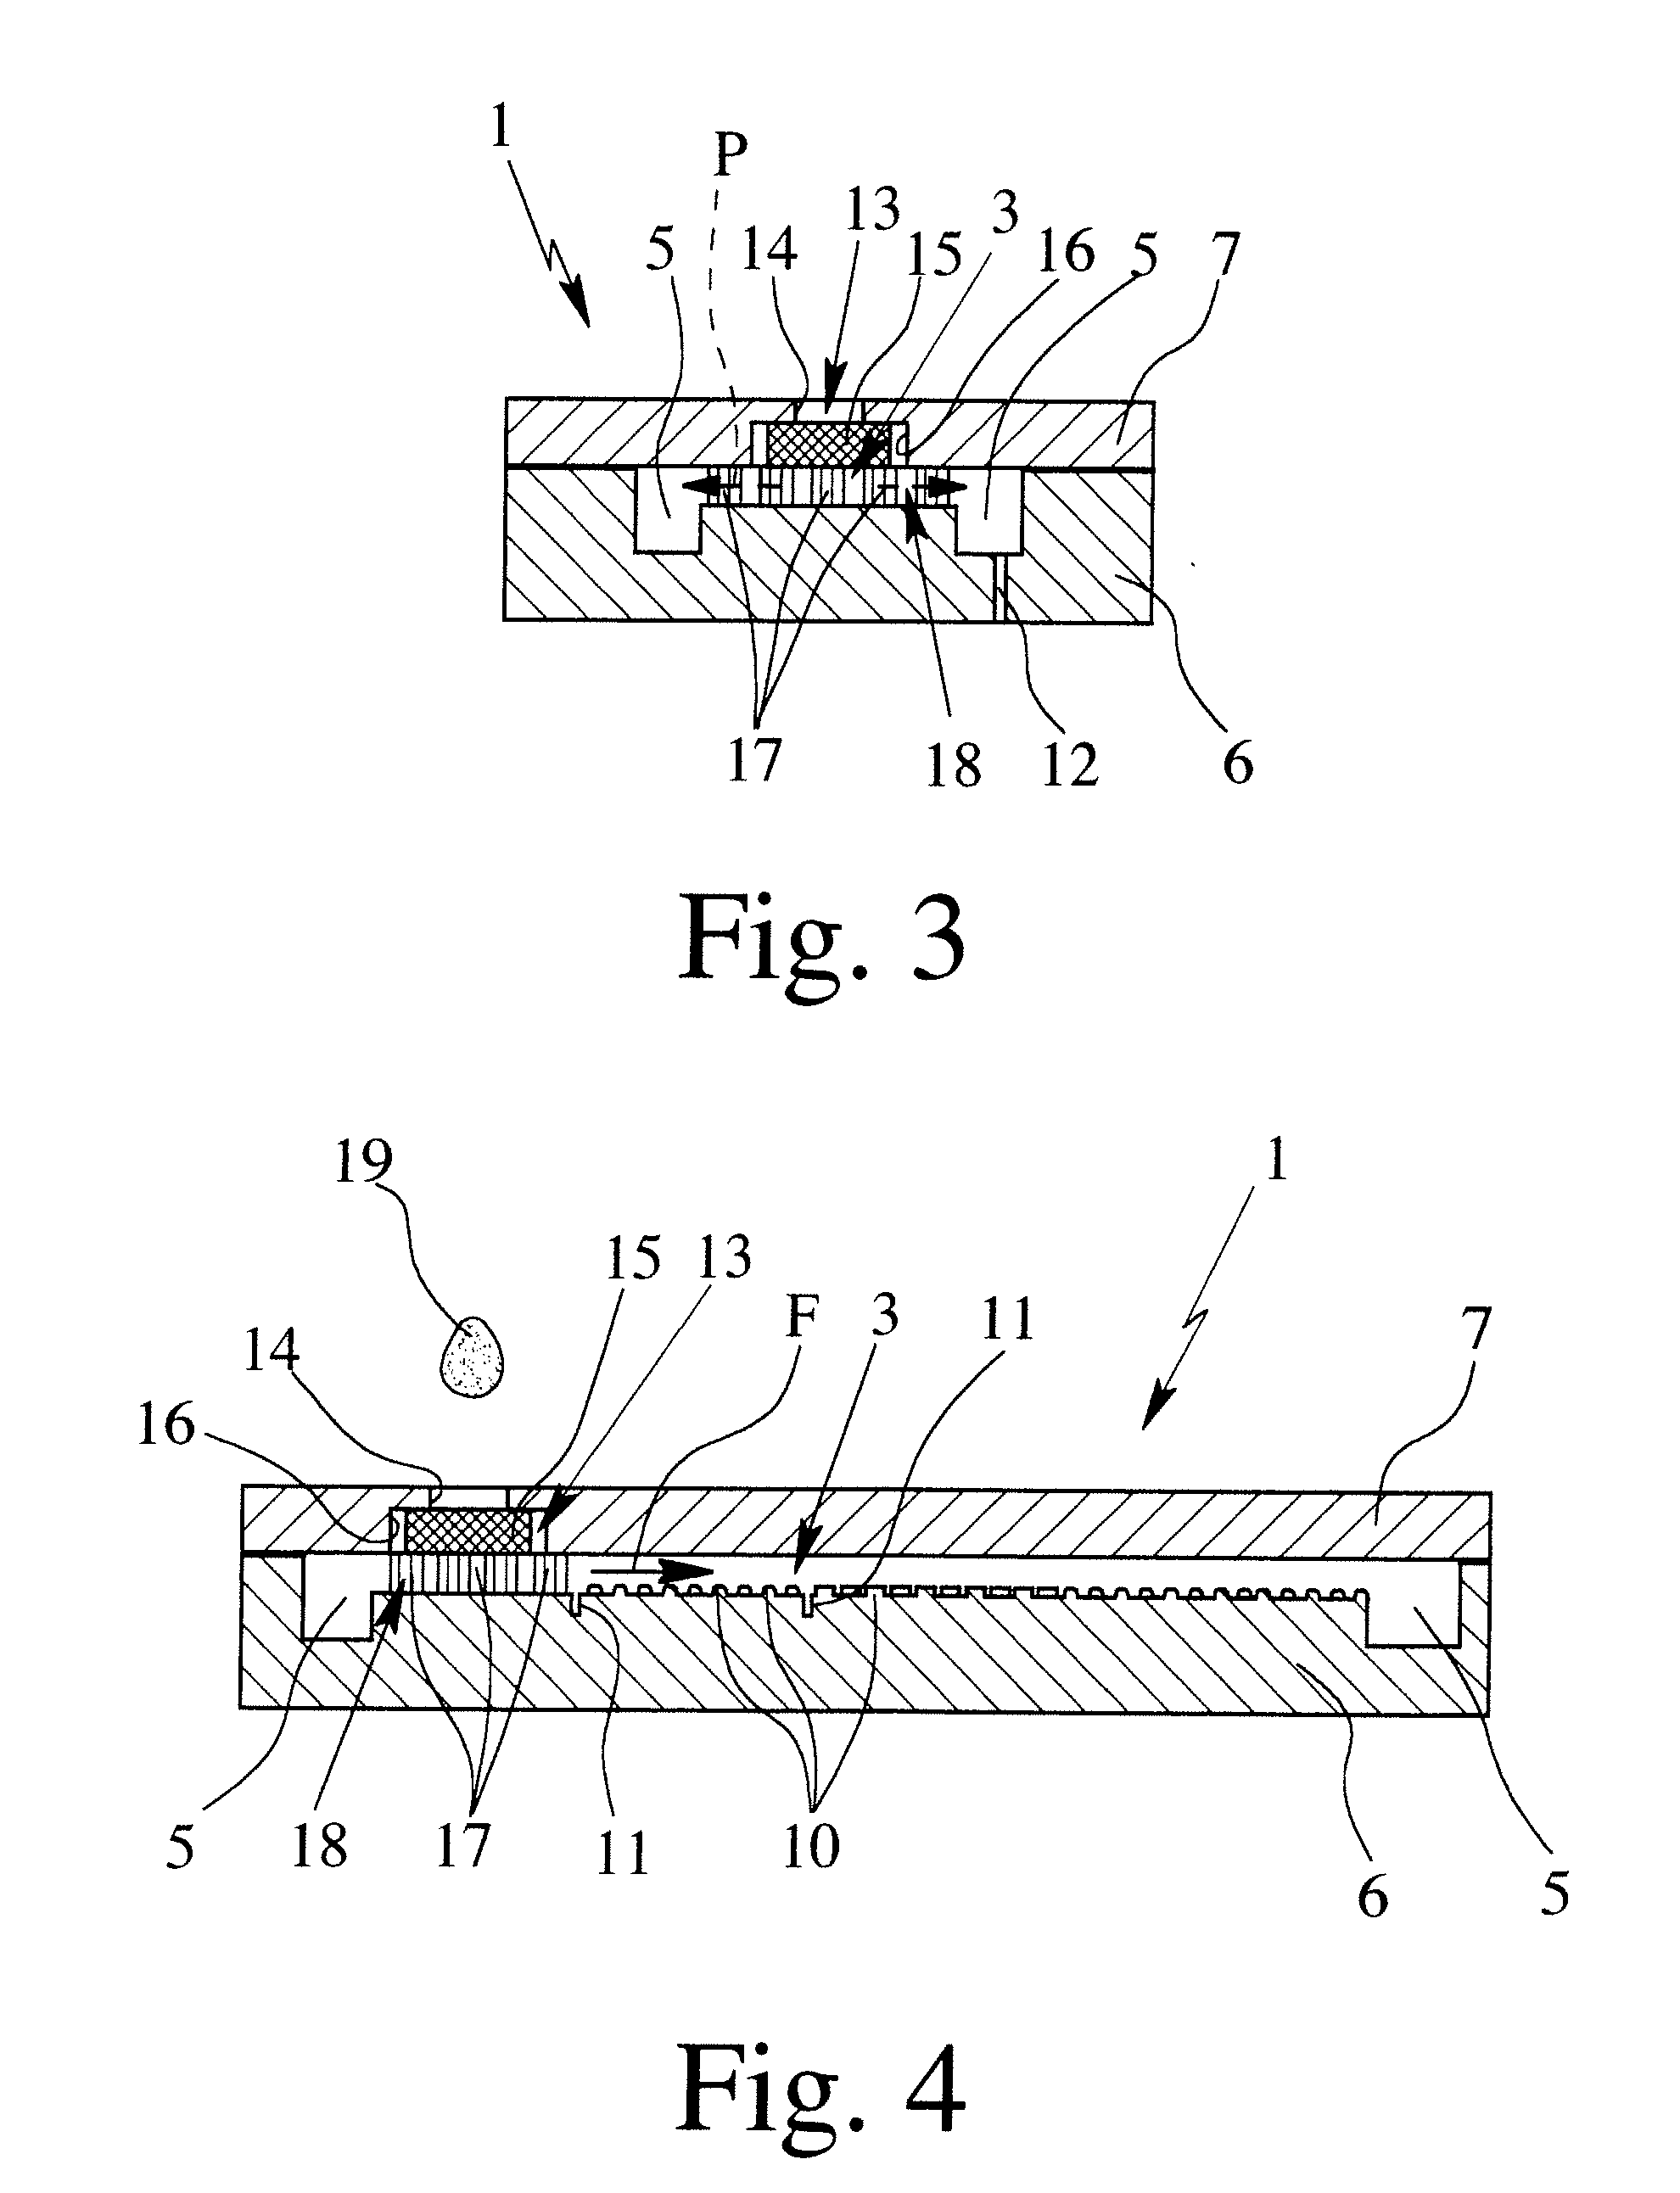 Device for Collecting Blood and Separating Blood Constituents, Method for Separating Blood Constituents and Use of Said Device